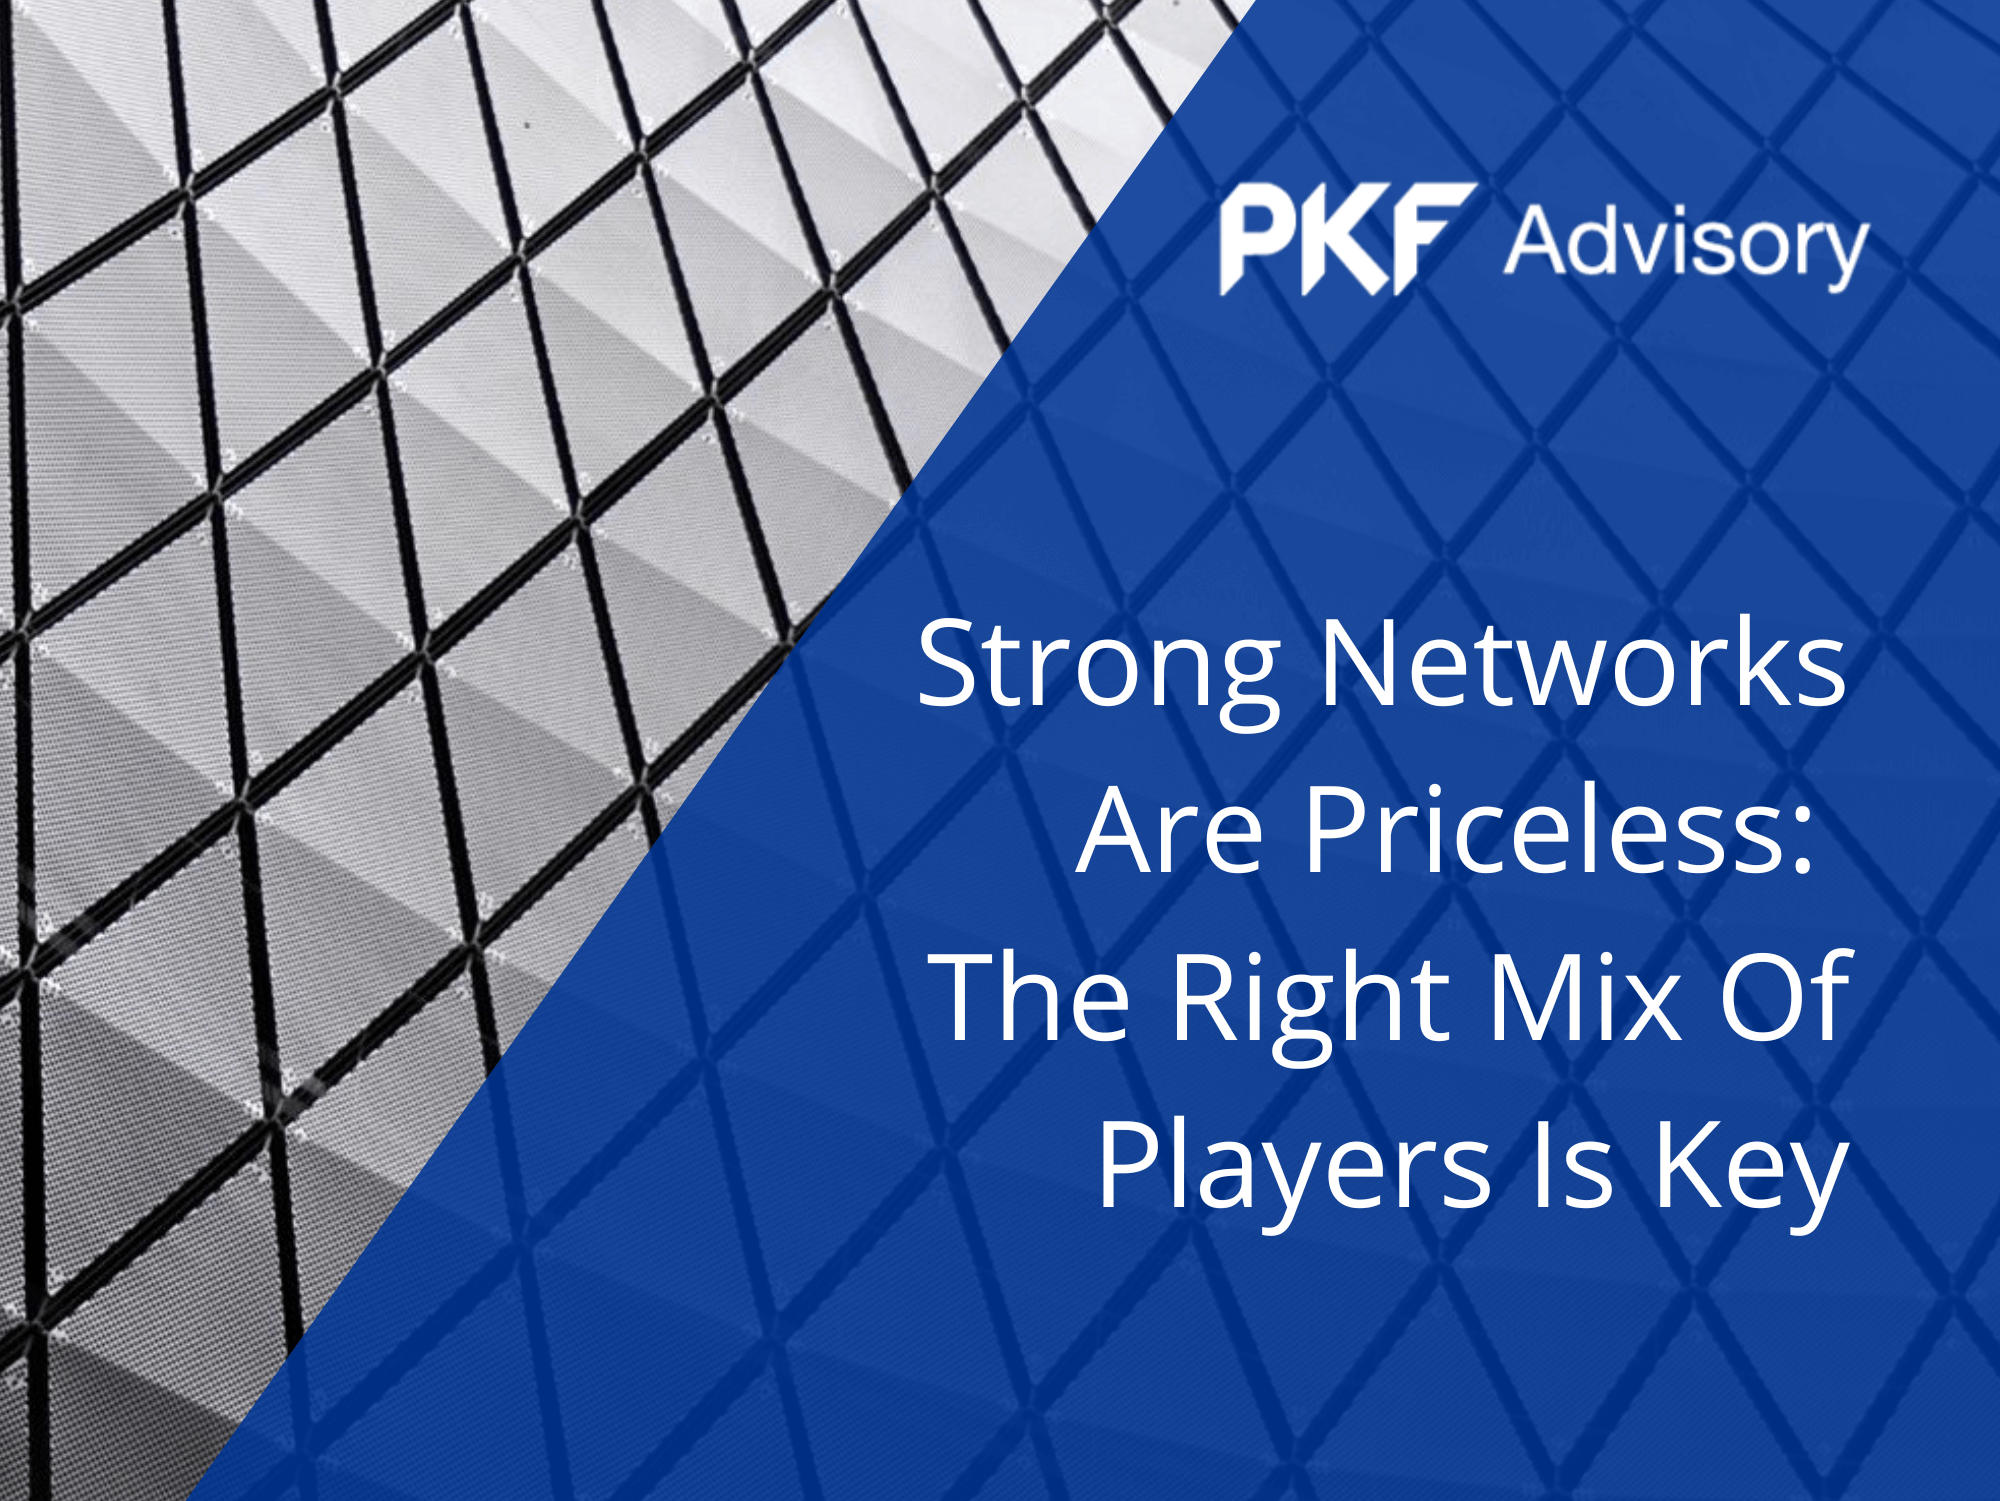 Strong Networks are Priceless: The Right Mix of Players is Key - Blog Post